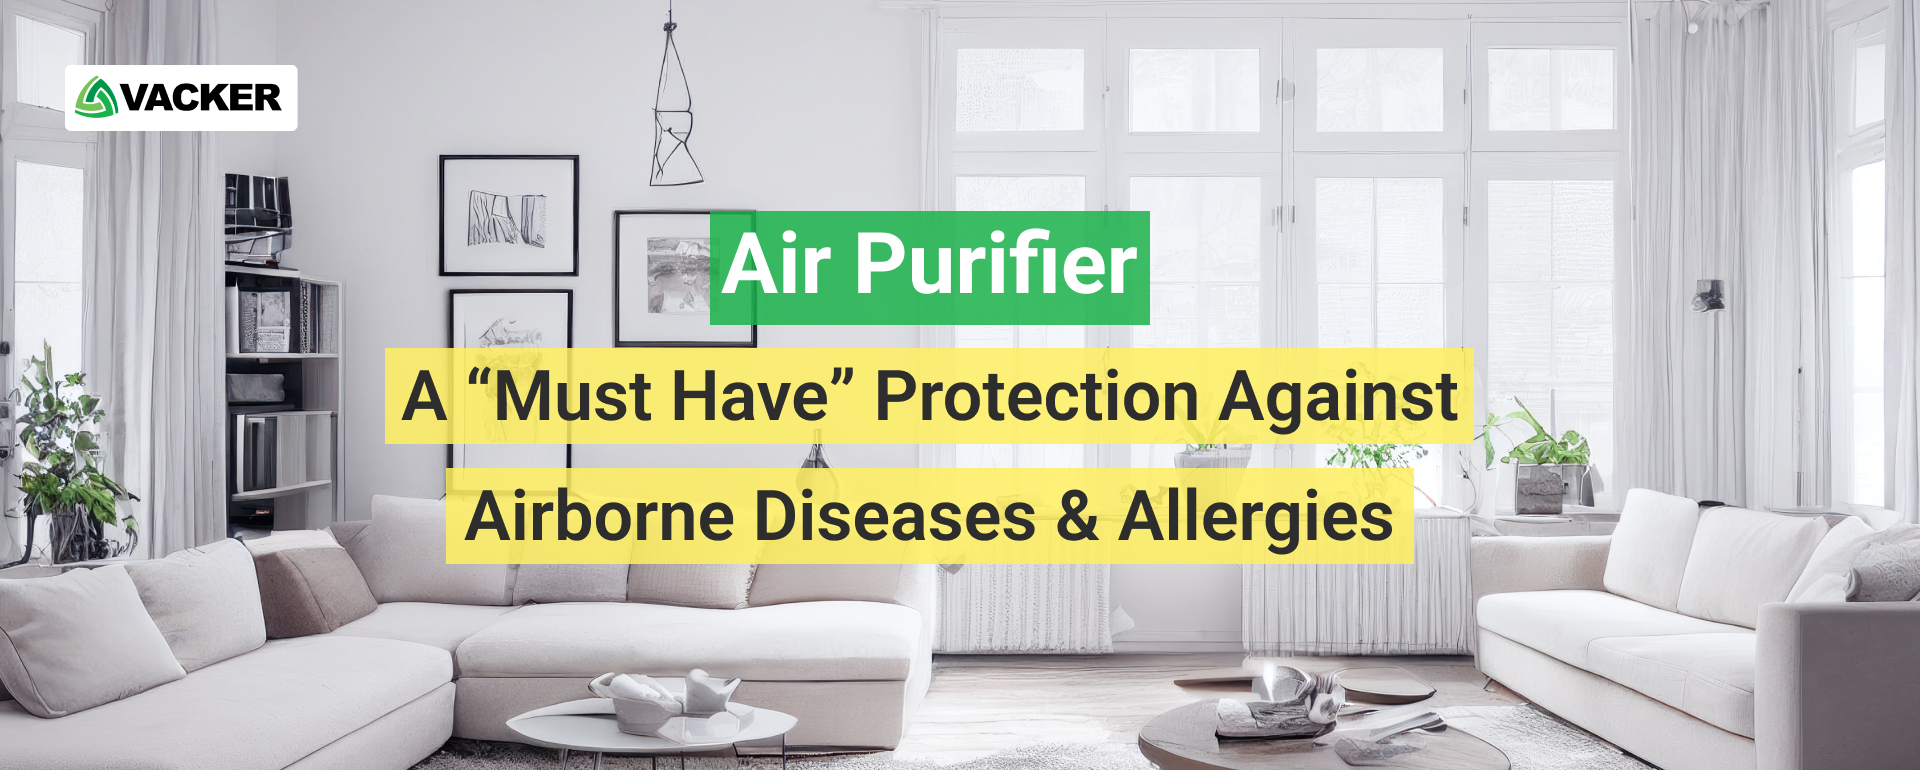 Air Purifier – A “Must Have” Protection Against Airborne Diseases & Allergies